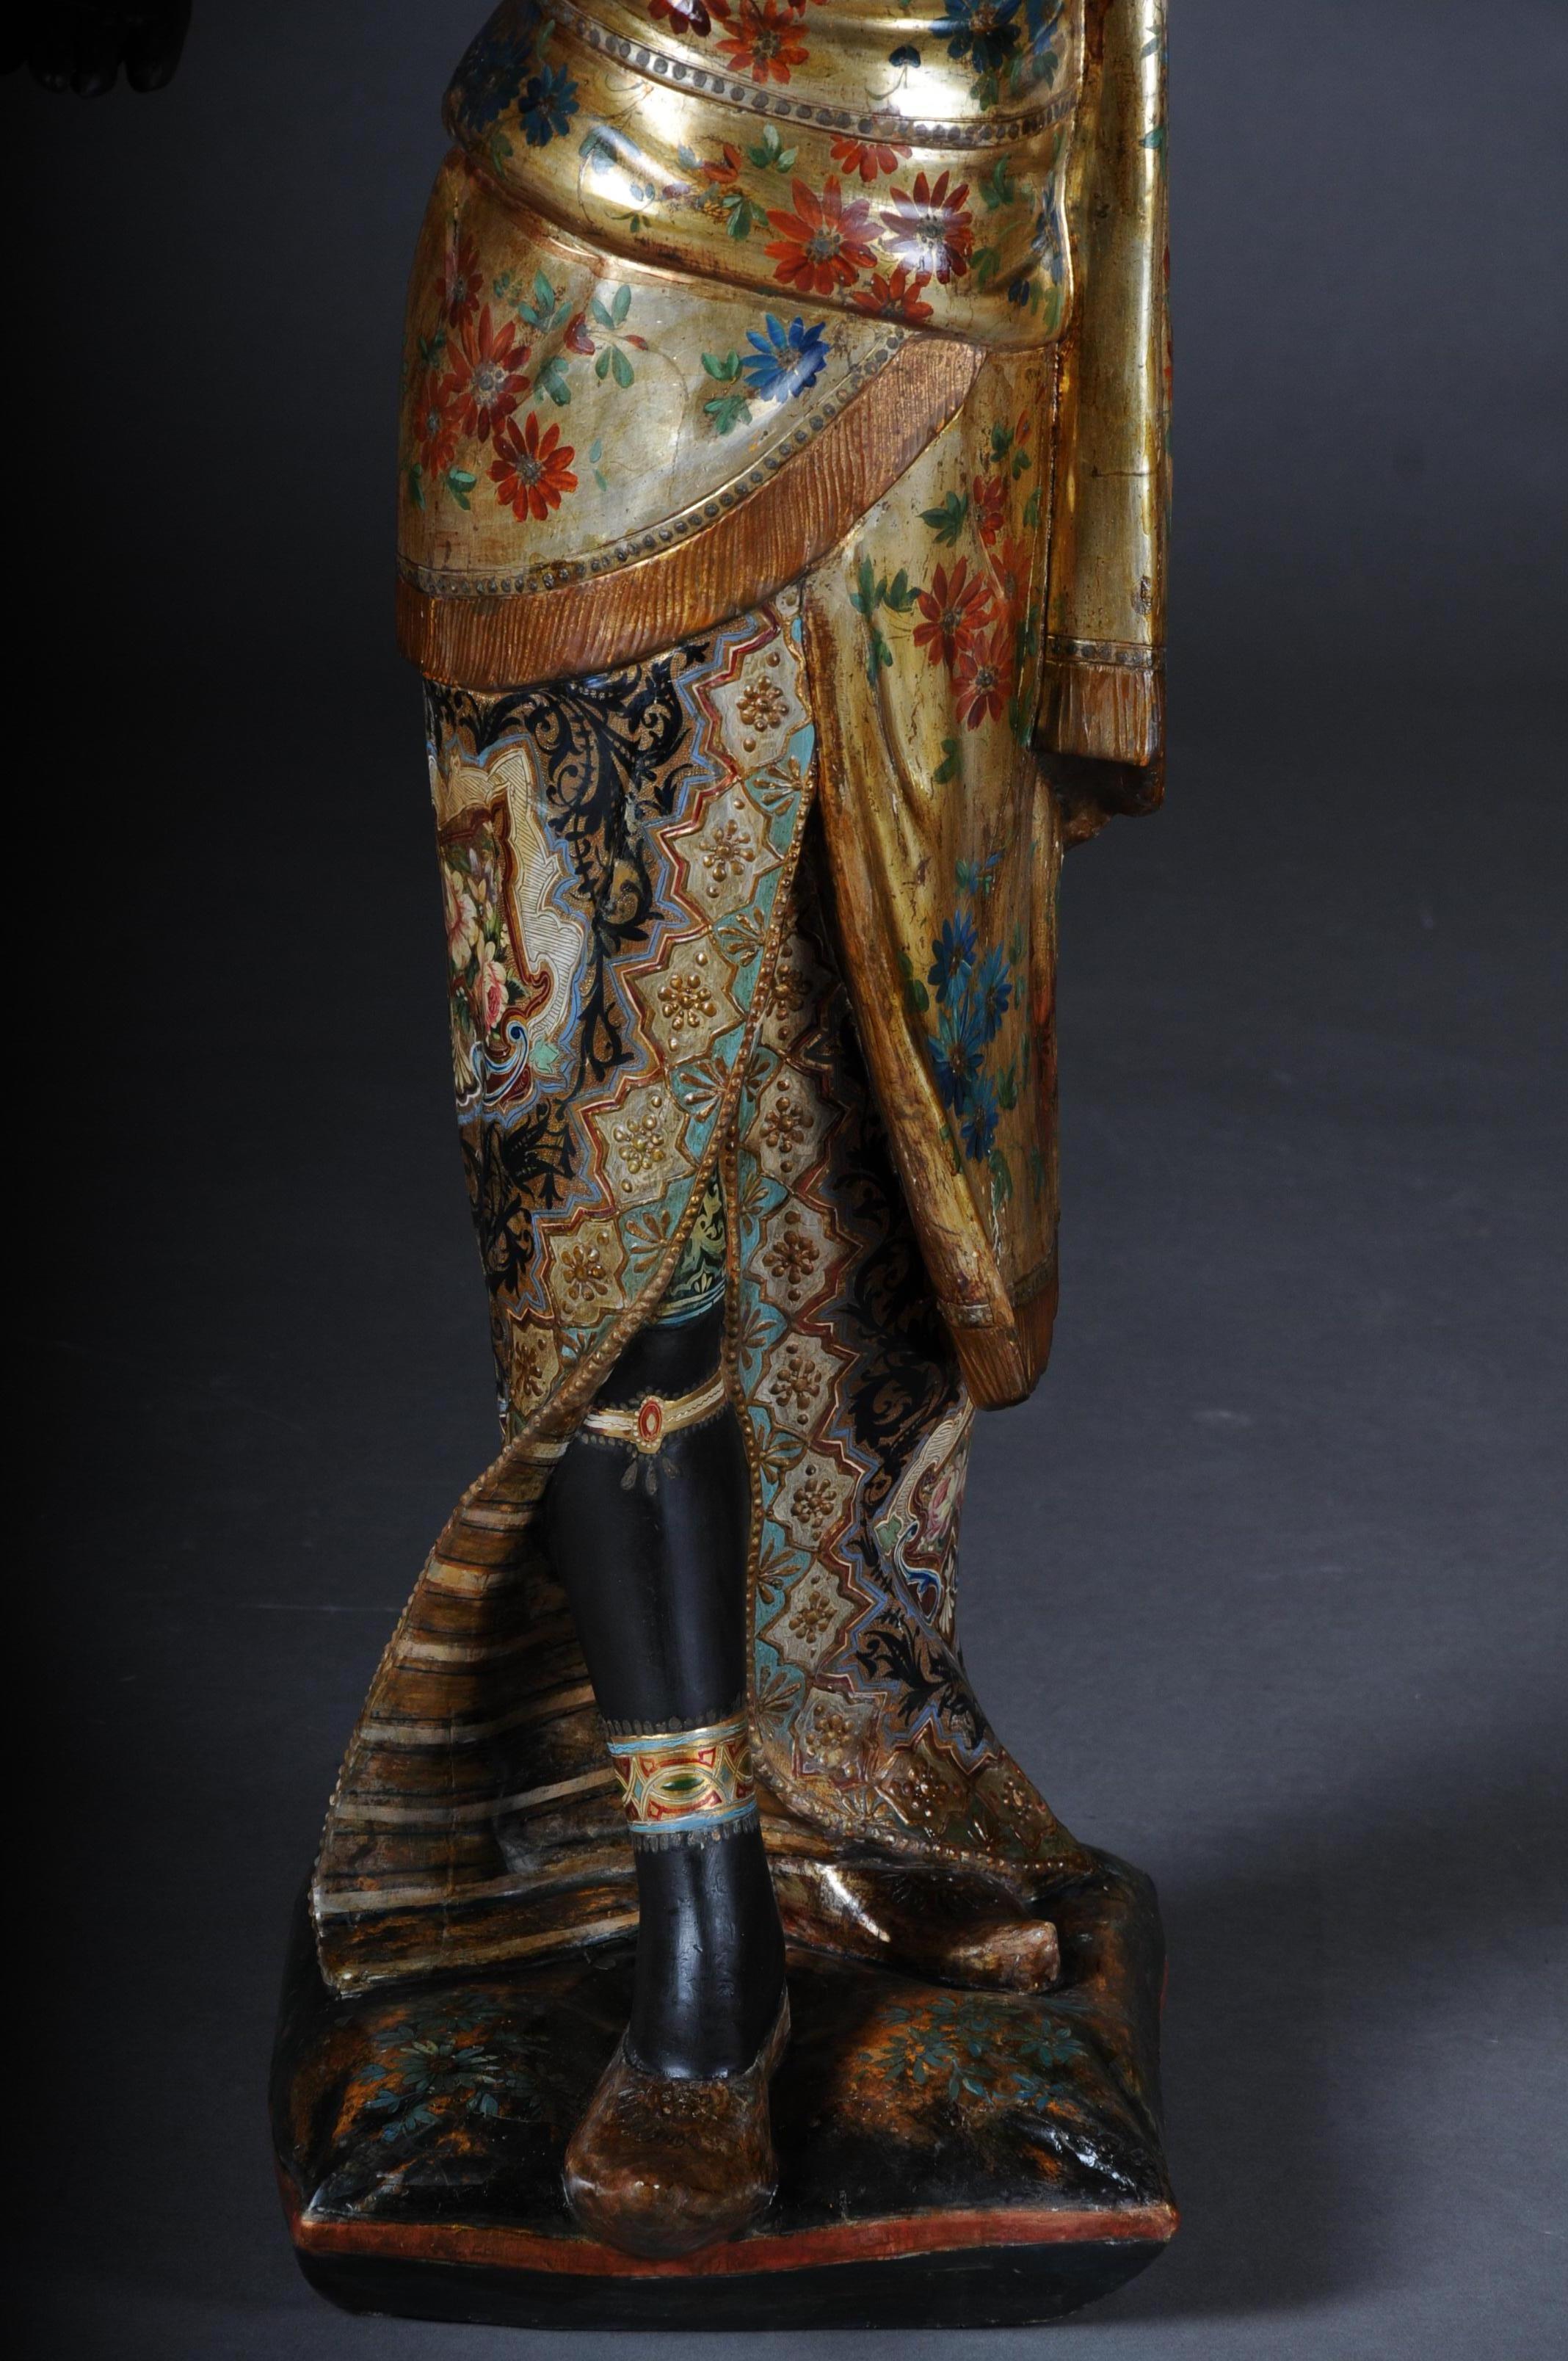 19th century antique Venetian Mohren chandelier wood sculpture

Standing on pillows in oriental robe and in her right hand a fire bowl as a candleholder. Probably Northern Italy / Venice, late 19th century
Fairytale and colorful painting.
Wood